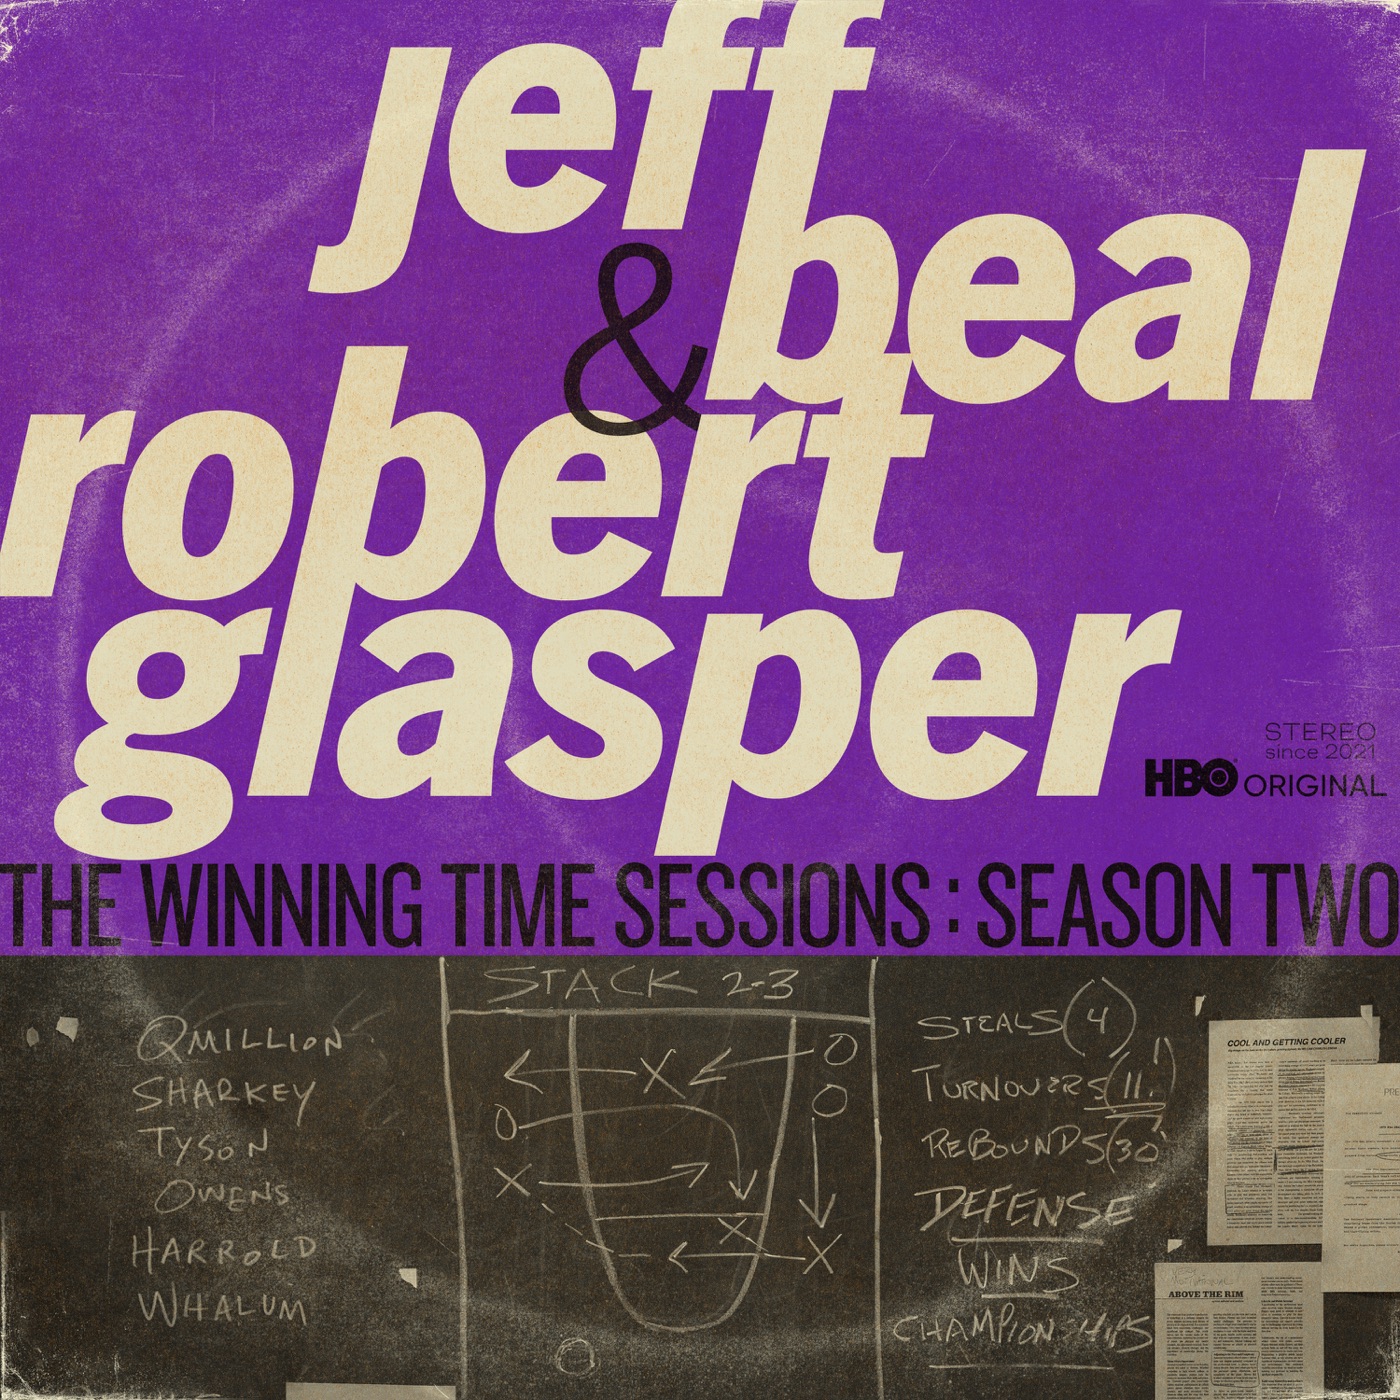 The Winning Time Sessions: Season 2 (Soundtrack from the HBO® Original Series) by Jeff Beal, Robert Glasper